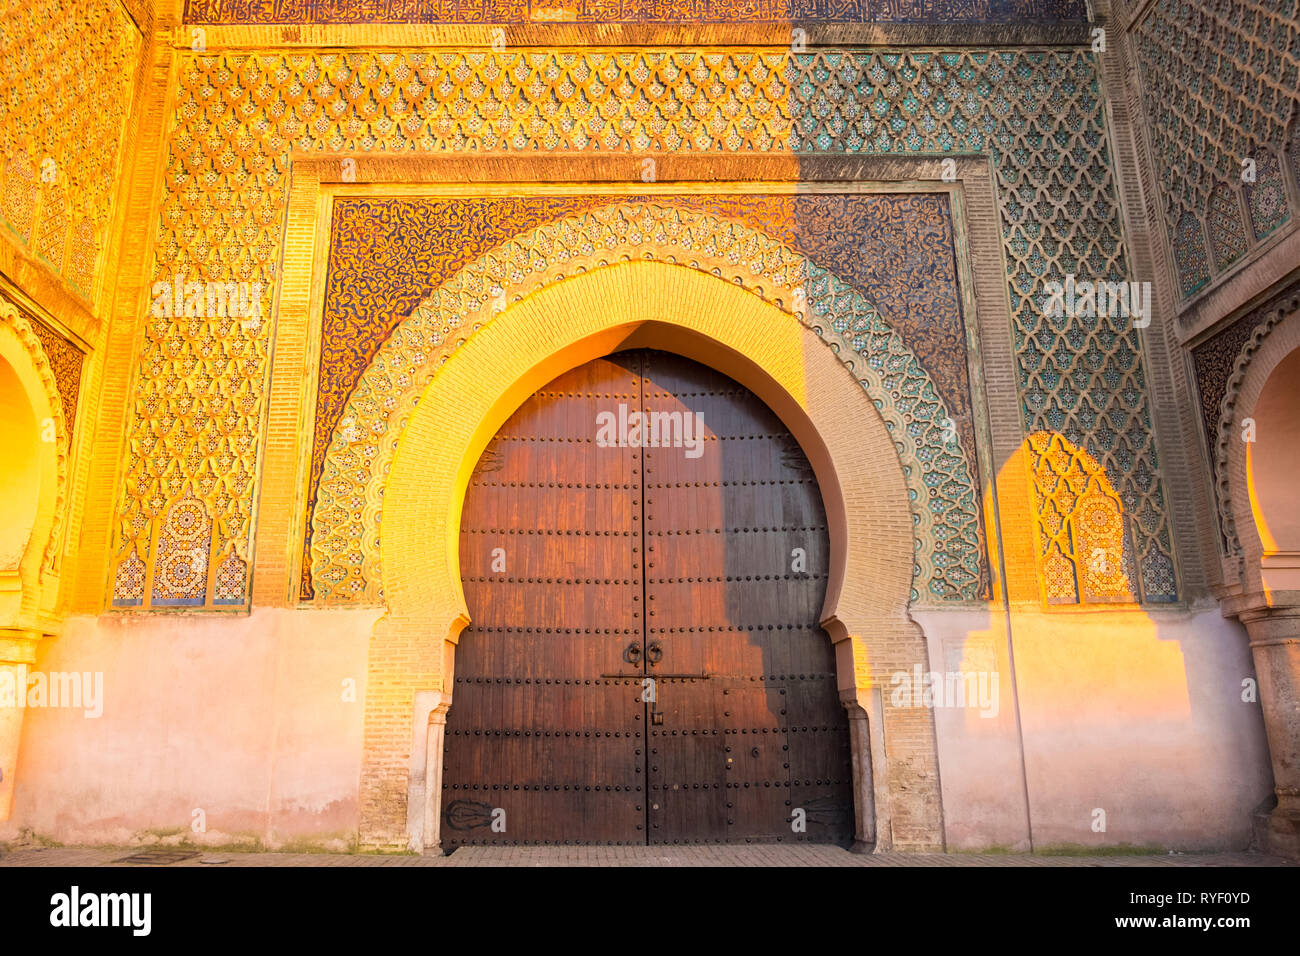 Golden hour at centered Bab al mansour gate in the old town medina of Meknes, Morocco. Horizontal Stock Photo